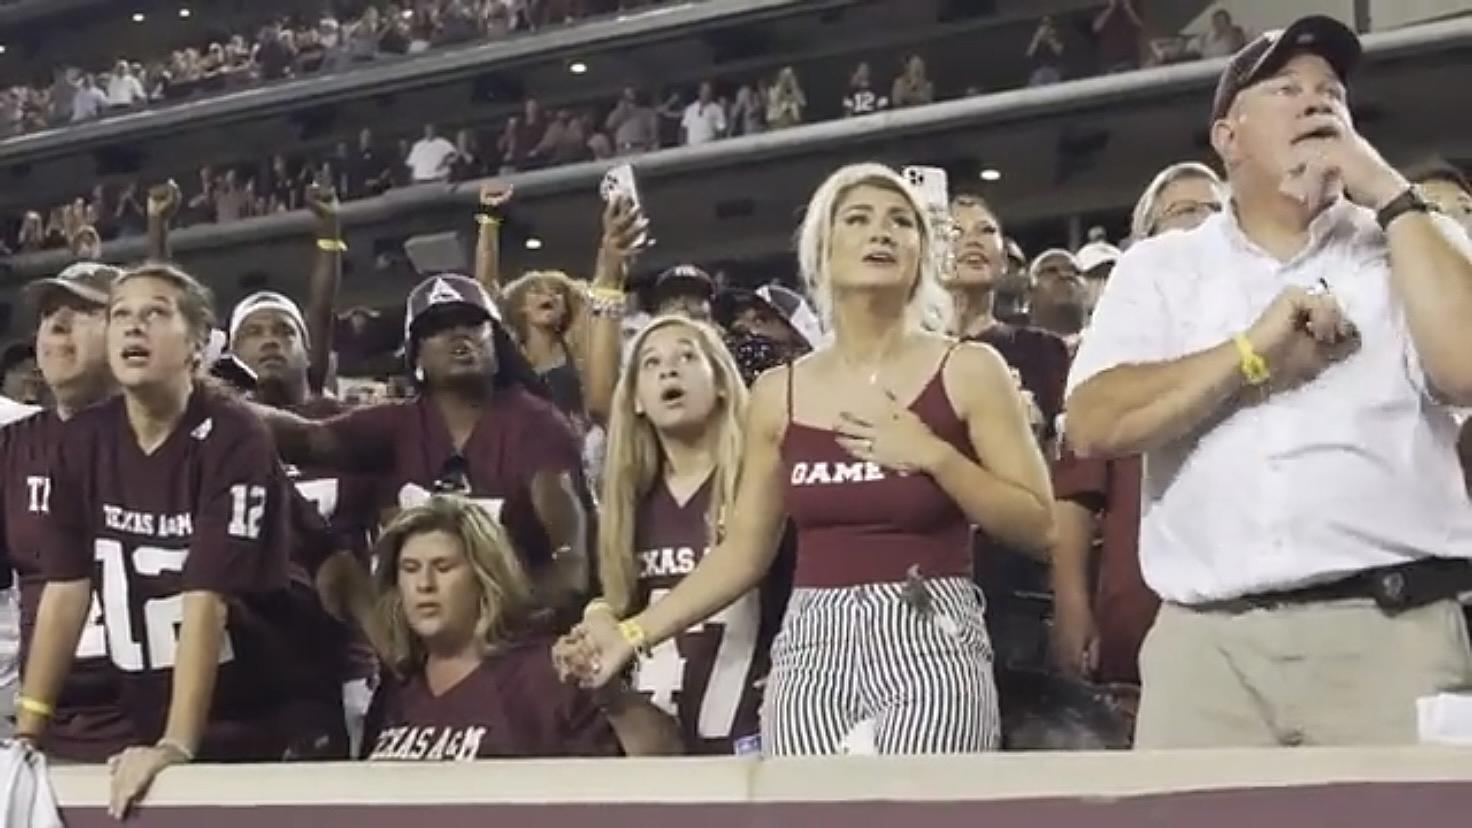 Texas A&M pulls off another miraculous upset of top-ranked Alabama